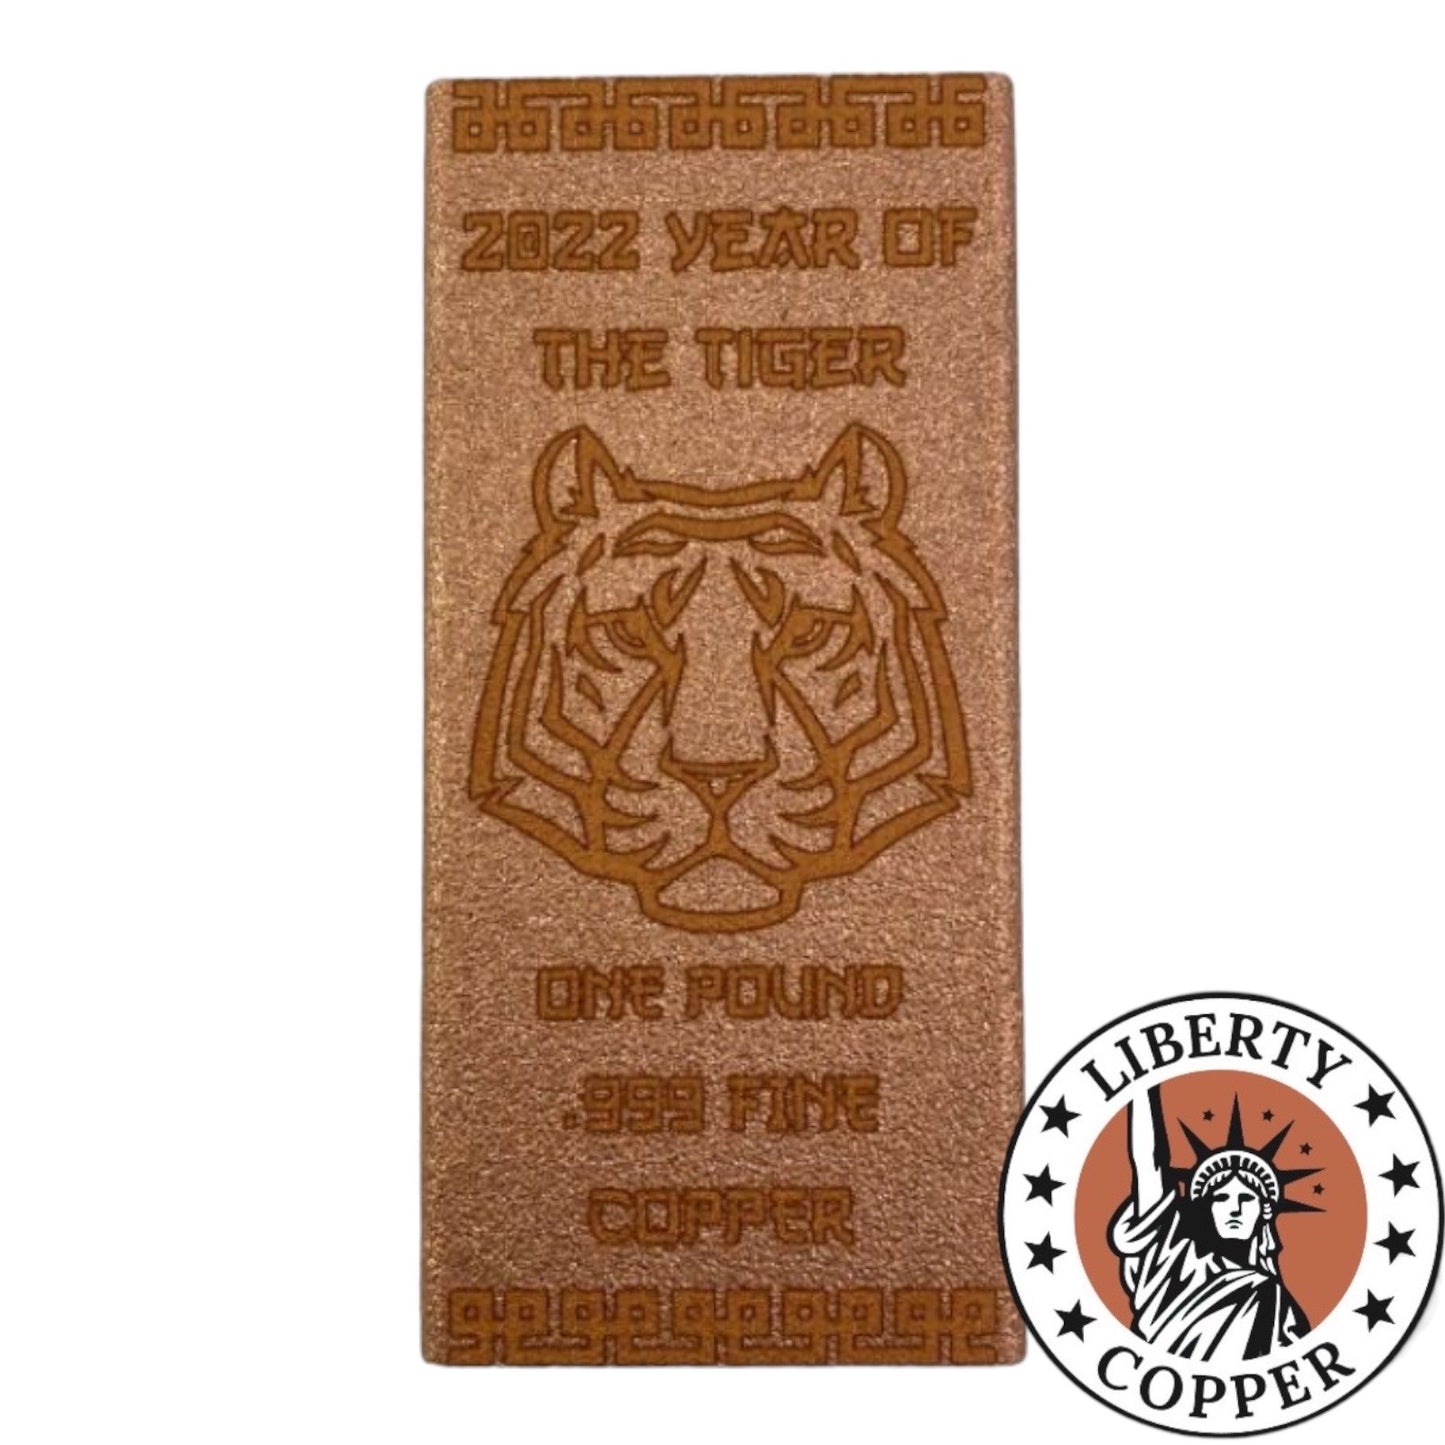 2022 YEAR OF THE TIGER DESIGN - 1 Pound .999 FINE COPPER BAR by Liberty Copper